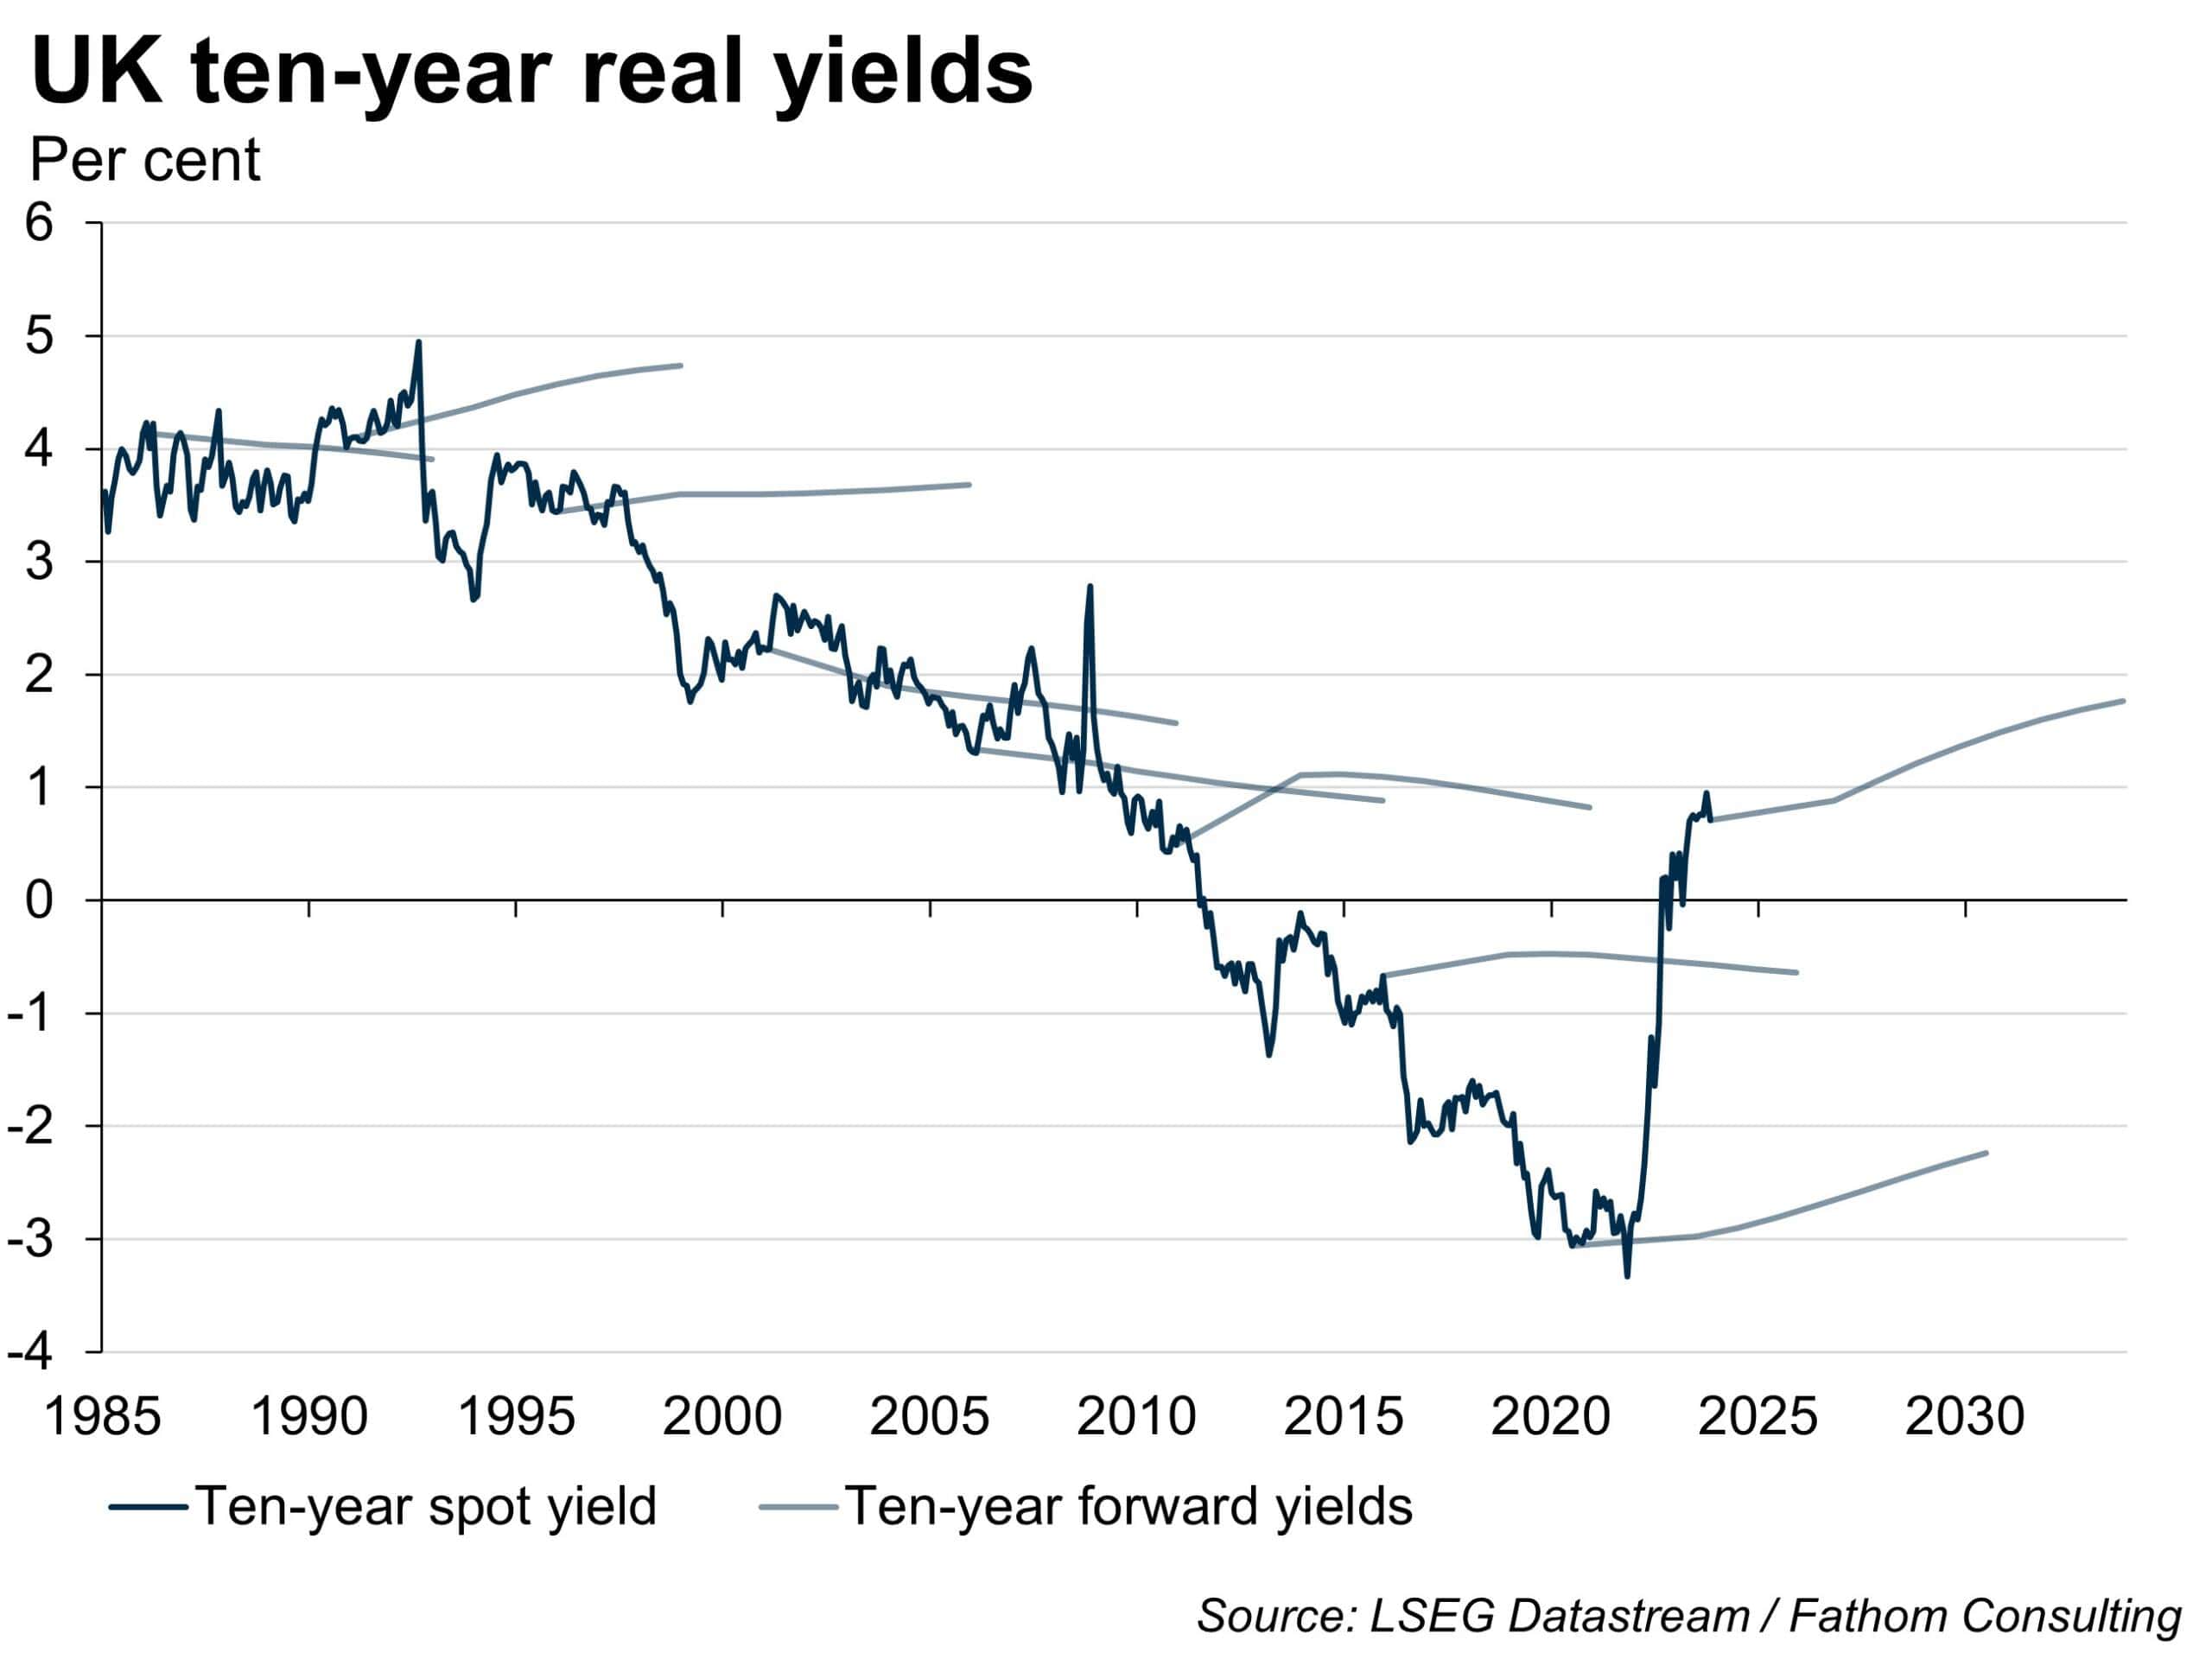 UK ten-year real yields, spot and forward yields from 1985 on